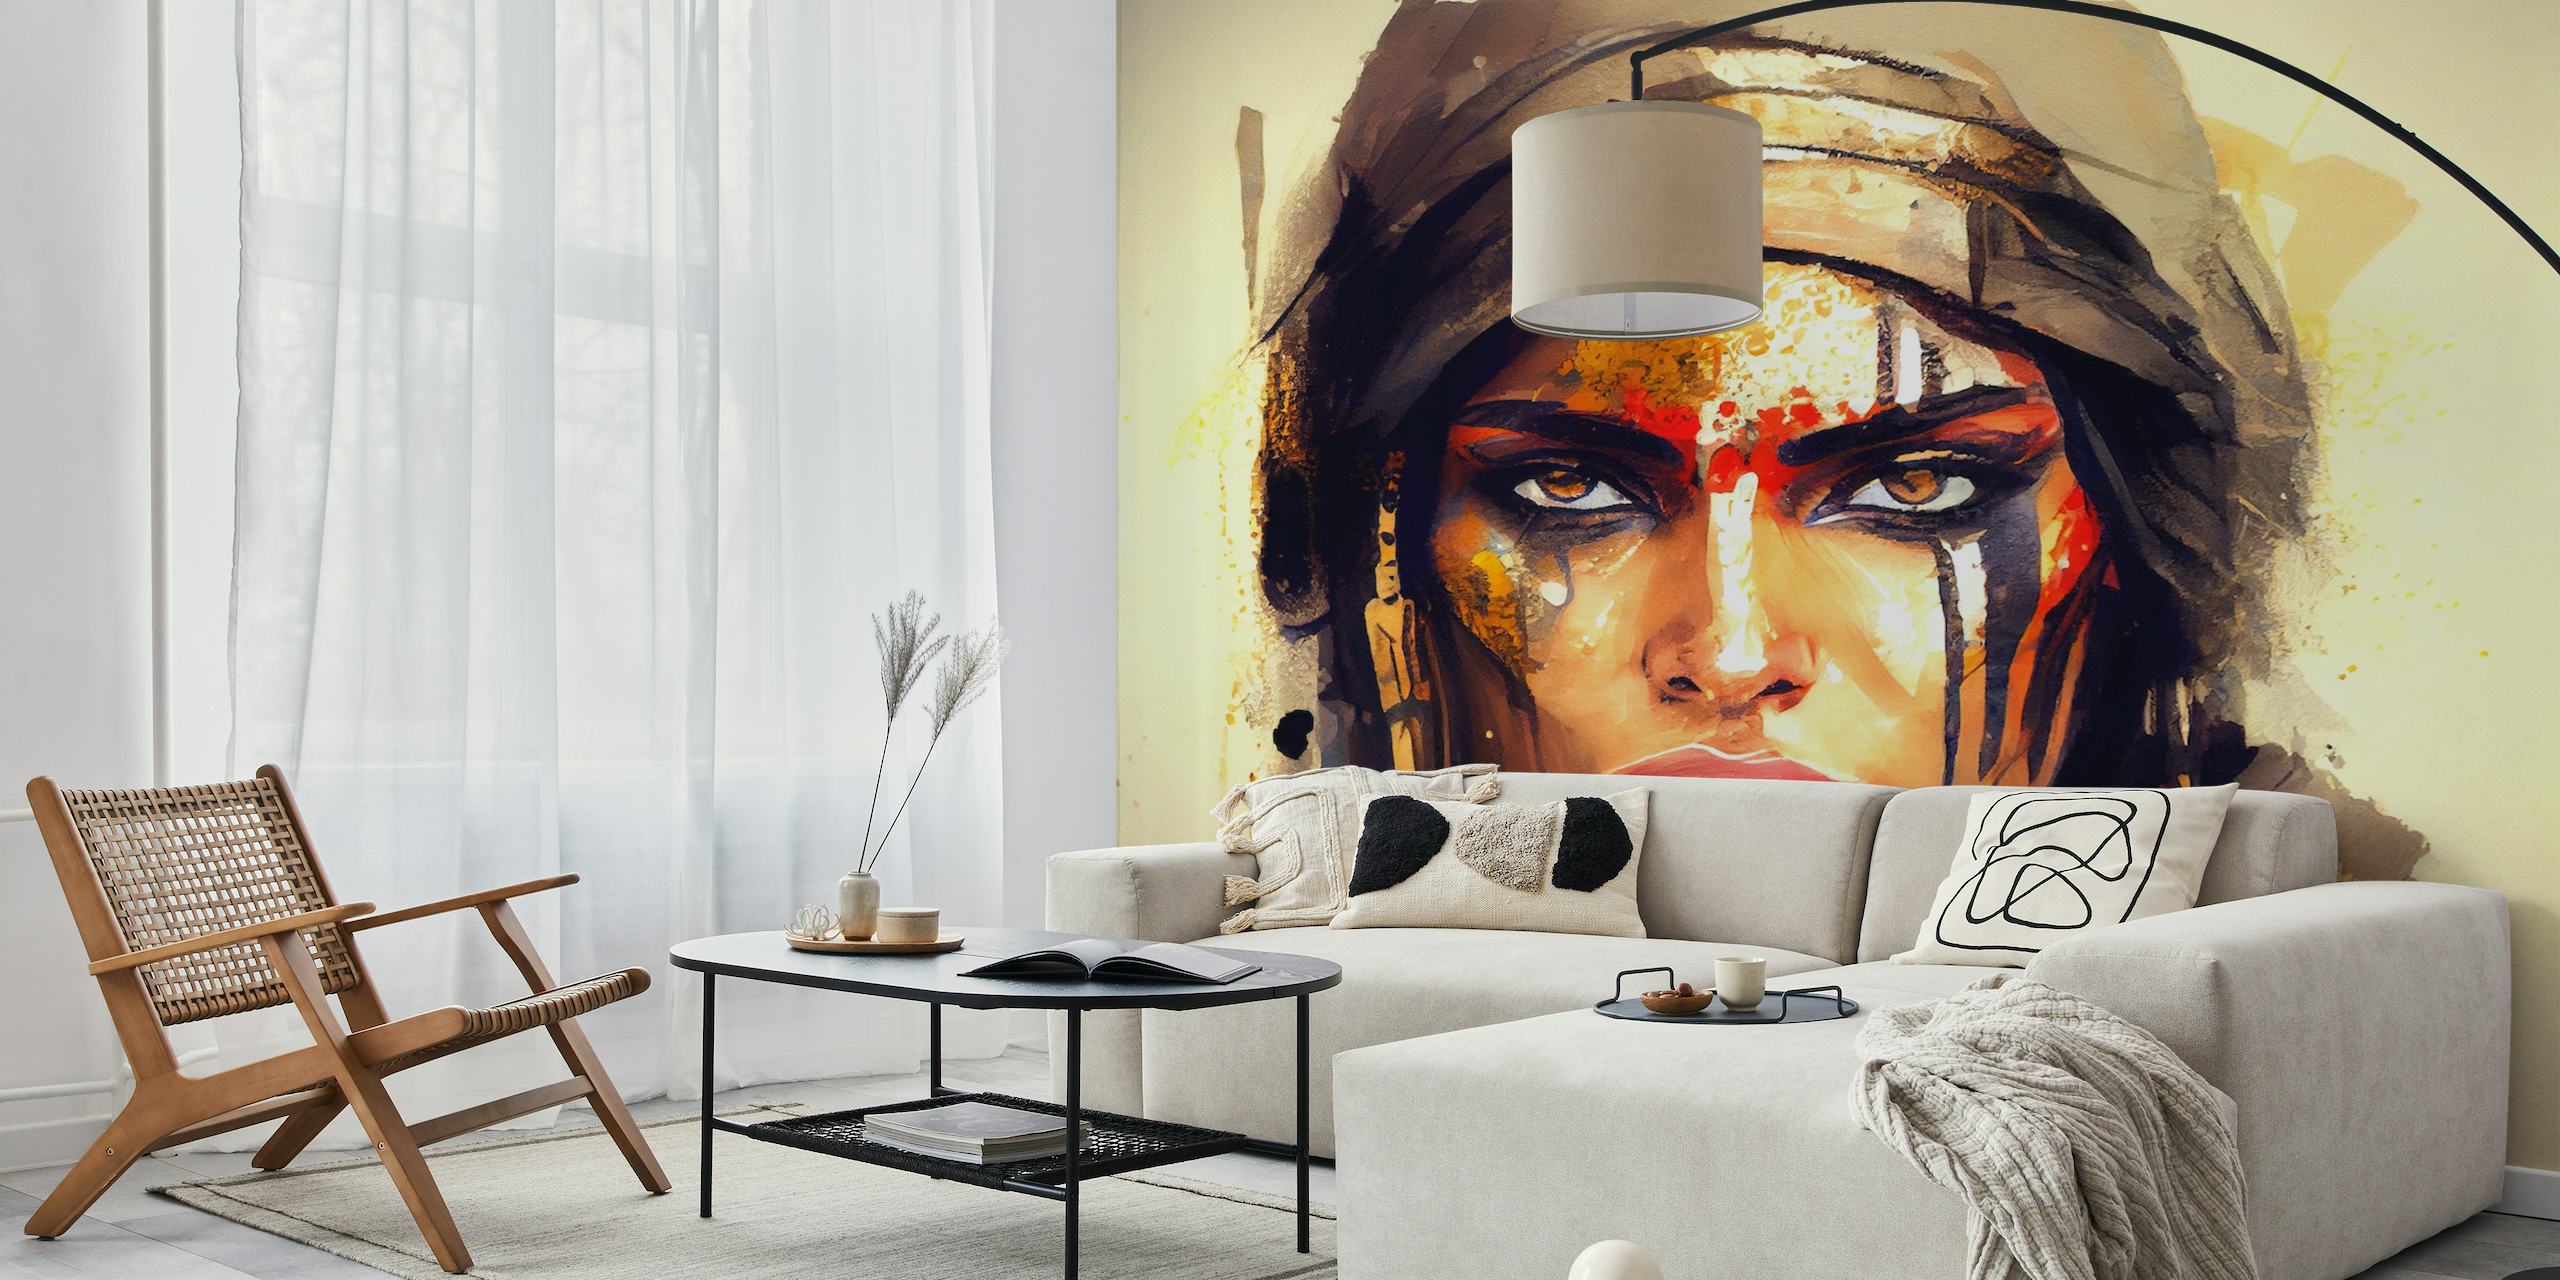 Artistic representation of a powerful Egyptian warrior woman with bold face paint and a determined expression.